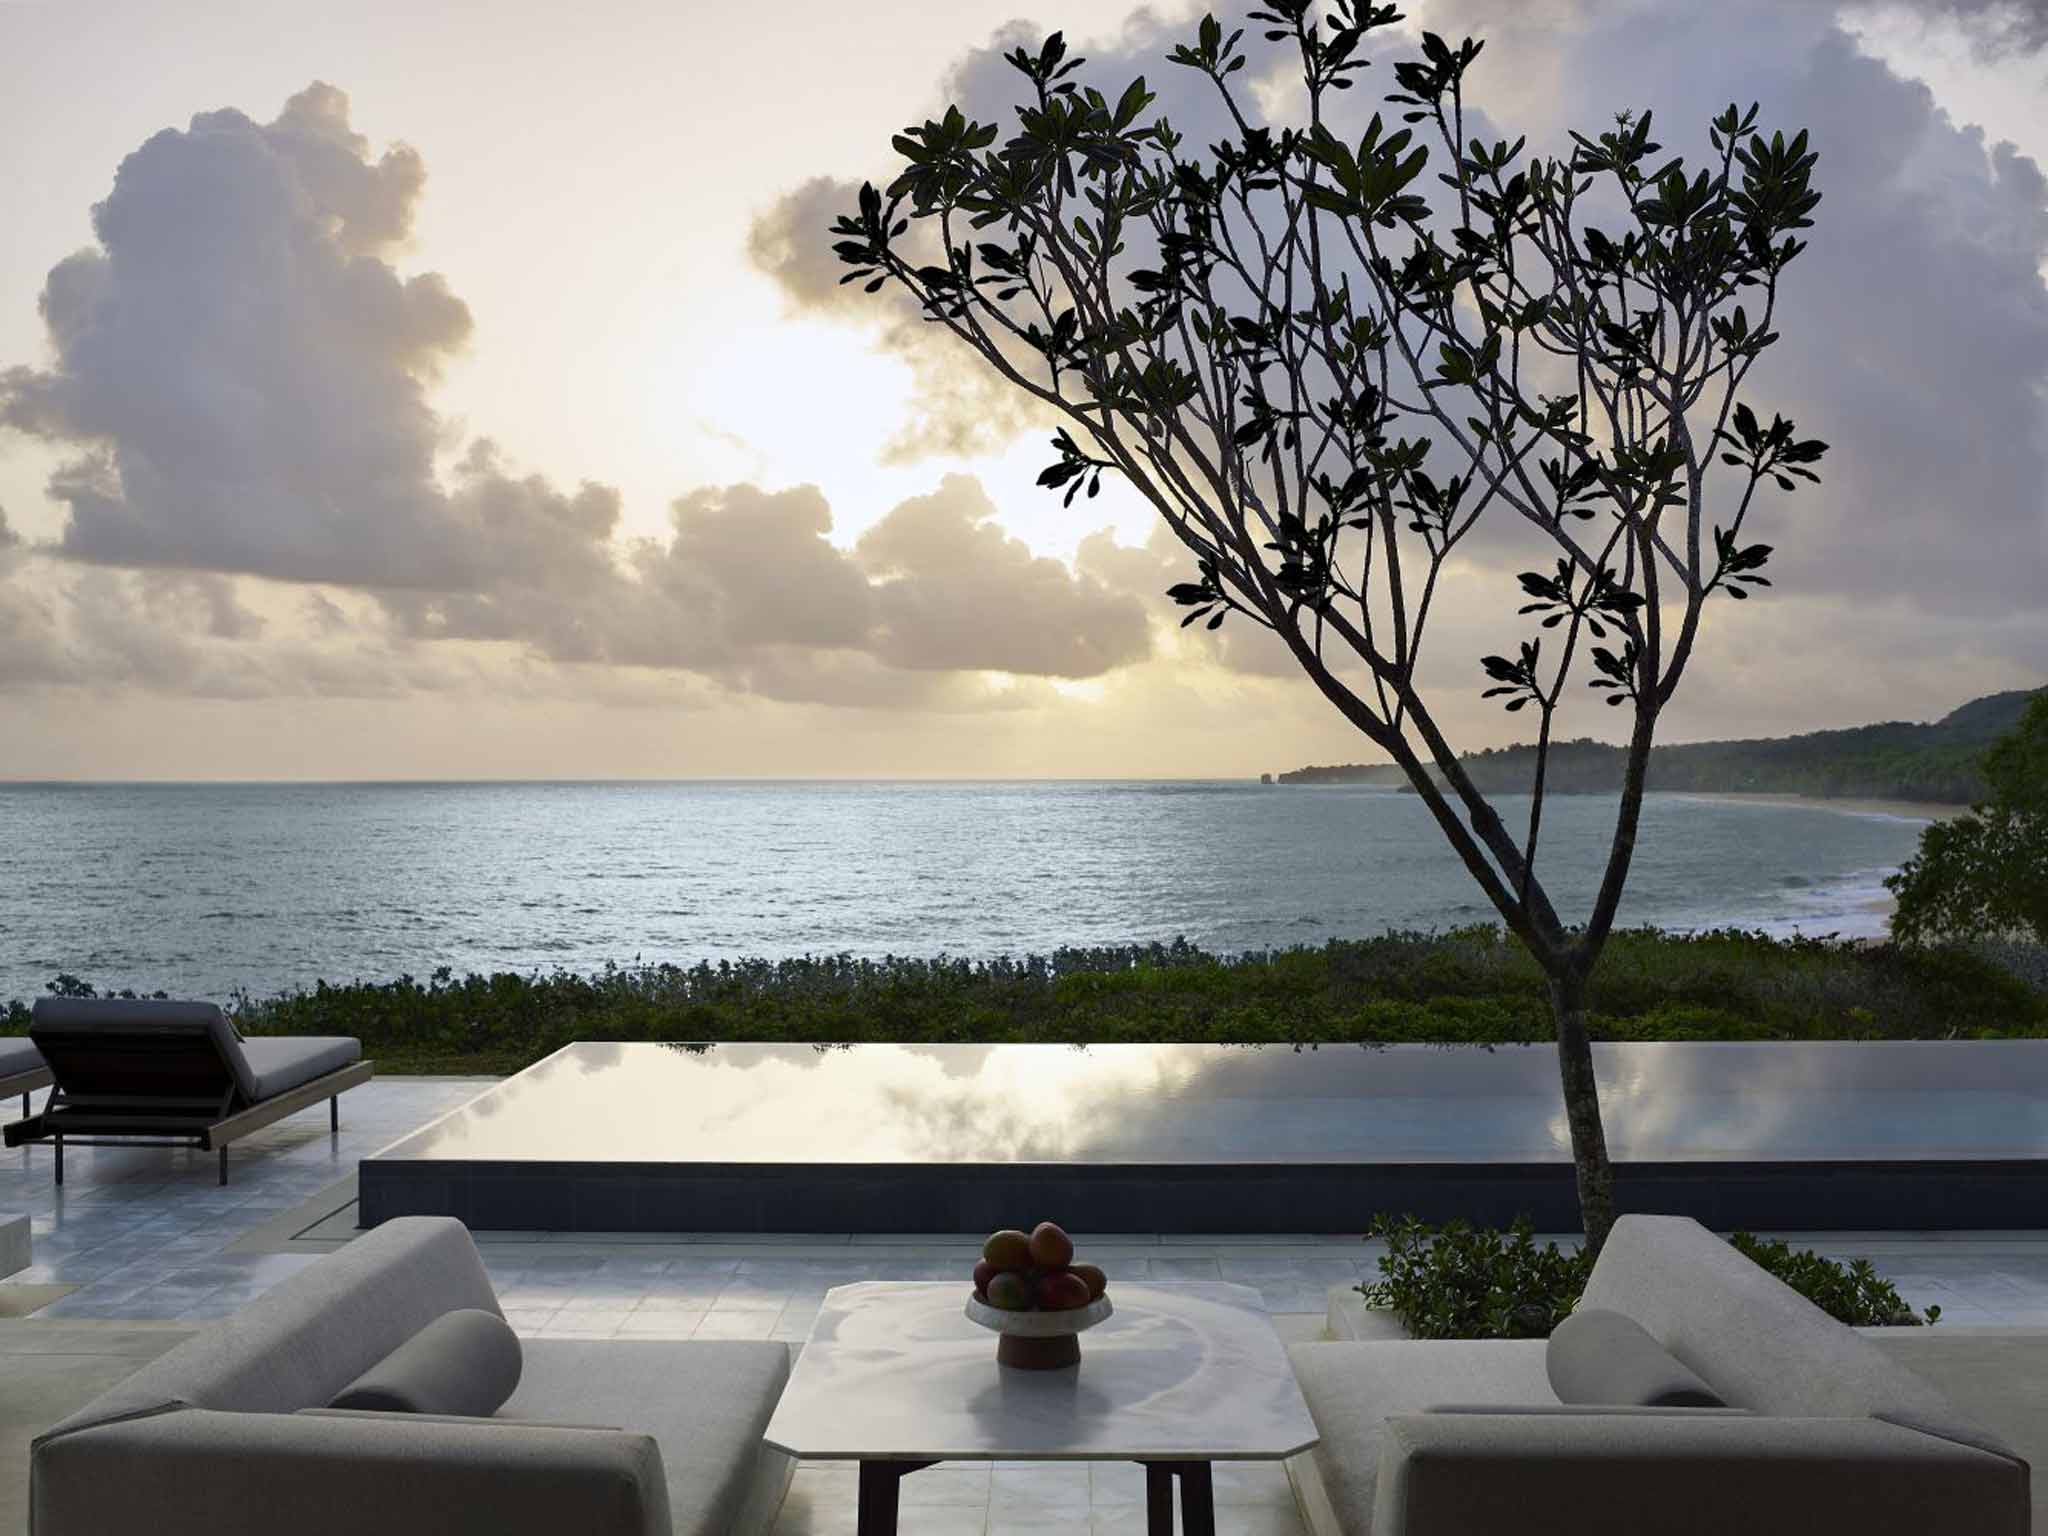 Aman Resorts will launched Amanera, a new resort in the Dominican Republic, in autumn 2015